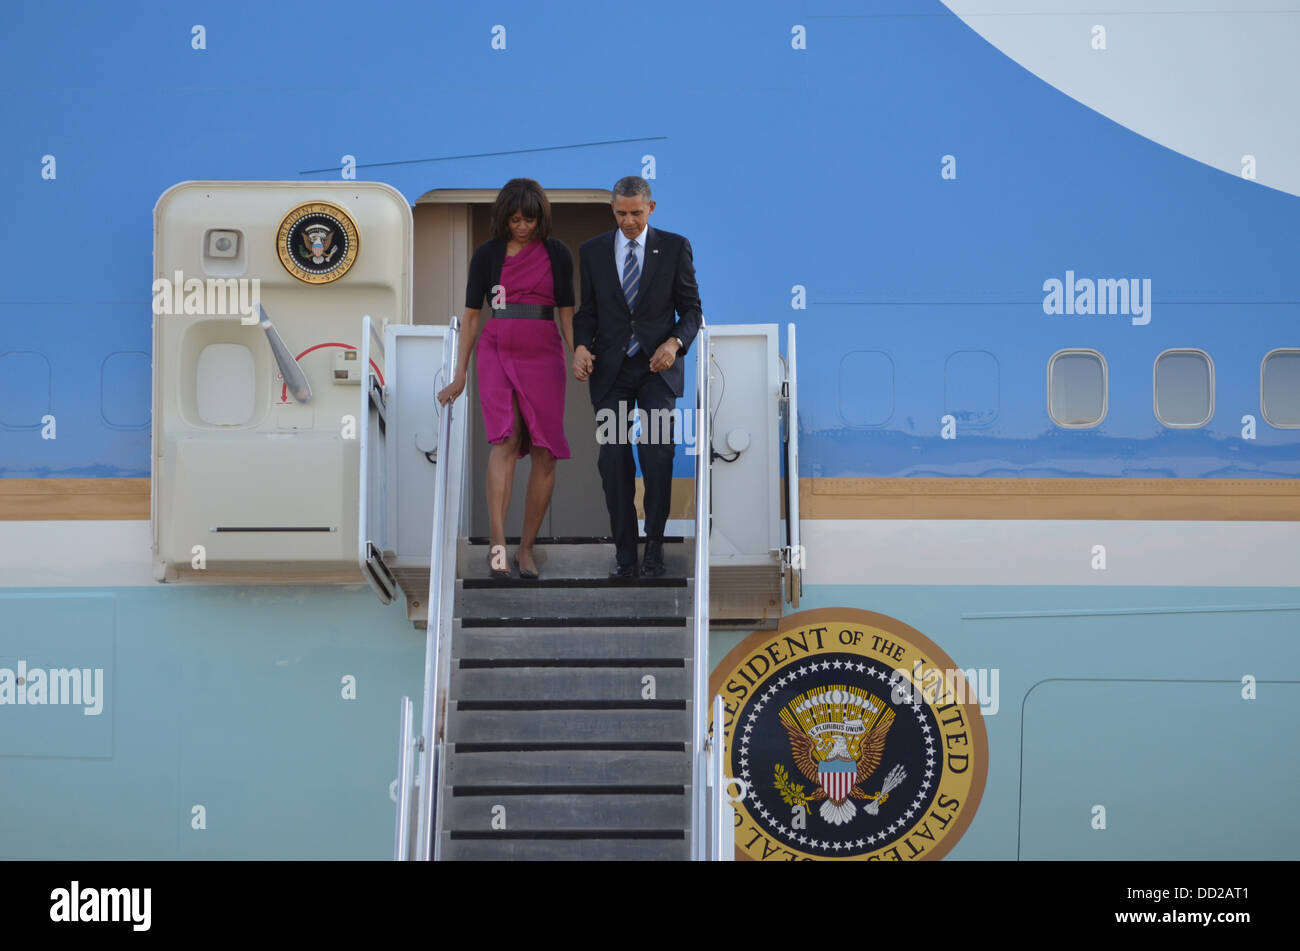 President Obama arrives at Dallas Love Field Airport Stock Photo